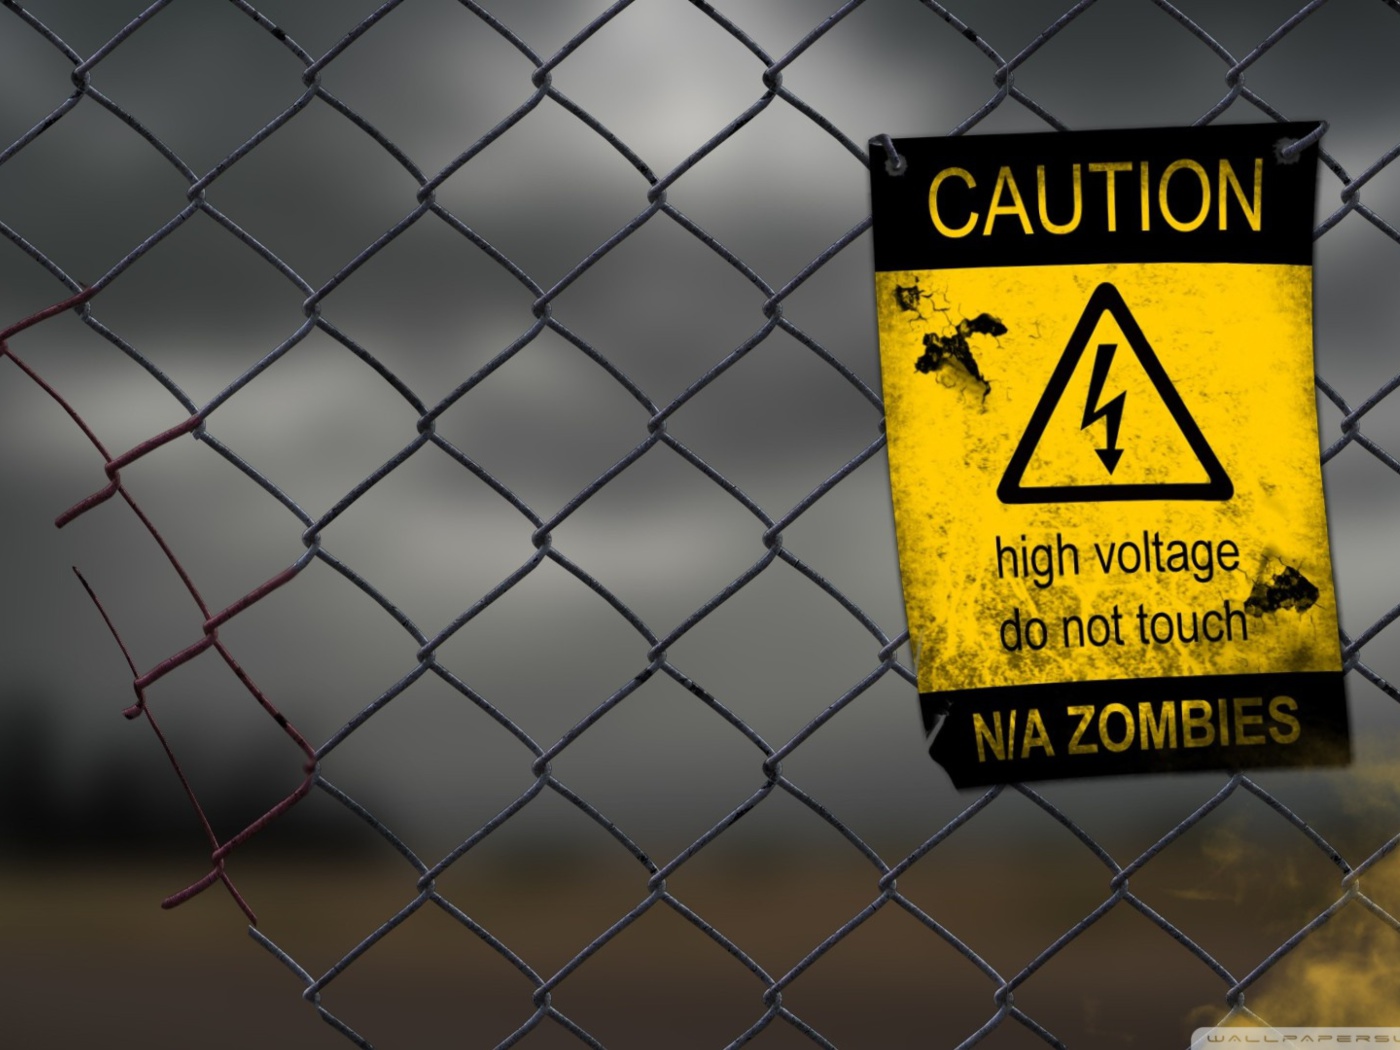 Sfondi Caution Zombies, High voltage do not touch 1400x1050